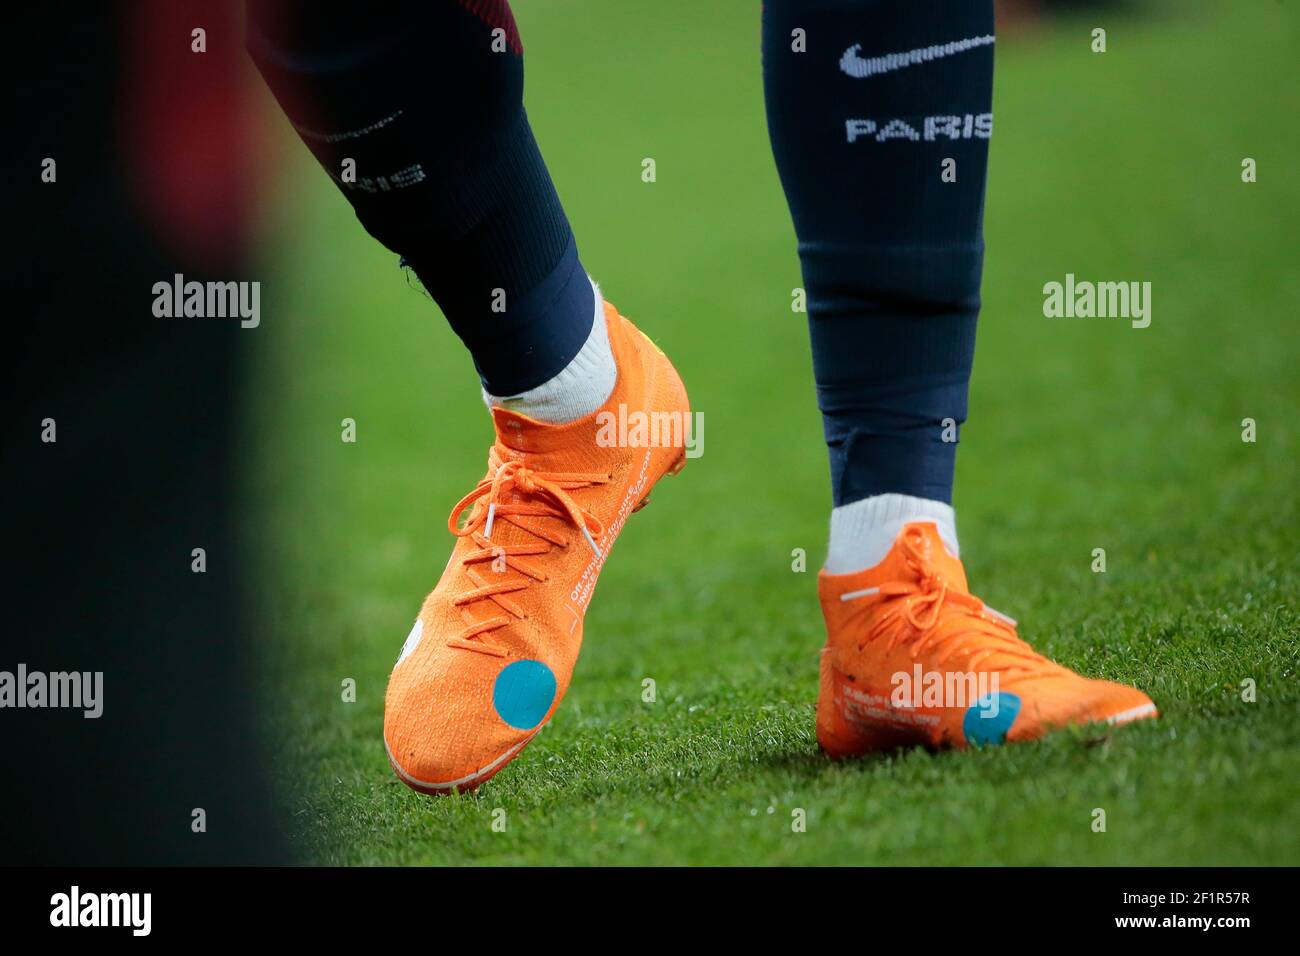 Shoes of Kylian Mbappe (PSG), Off-White ™ for NIKE 'Nike Mercurial Vapore'  Beaverton, Oregon USA c. 2018 'KNIT', during the French championship L1  football match between Paris Saint-Germain (PSG) and Monaco, on